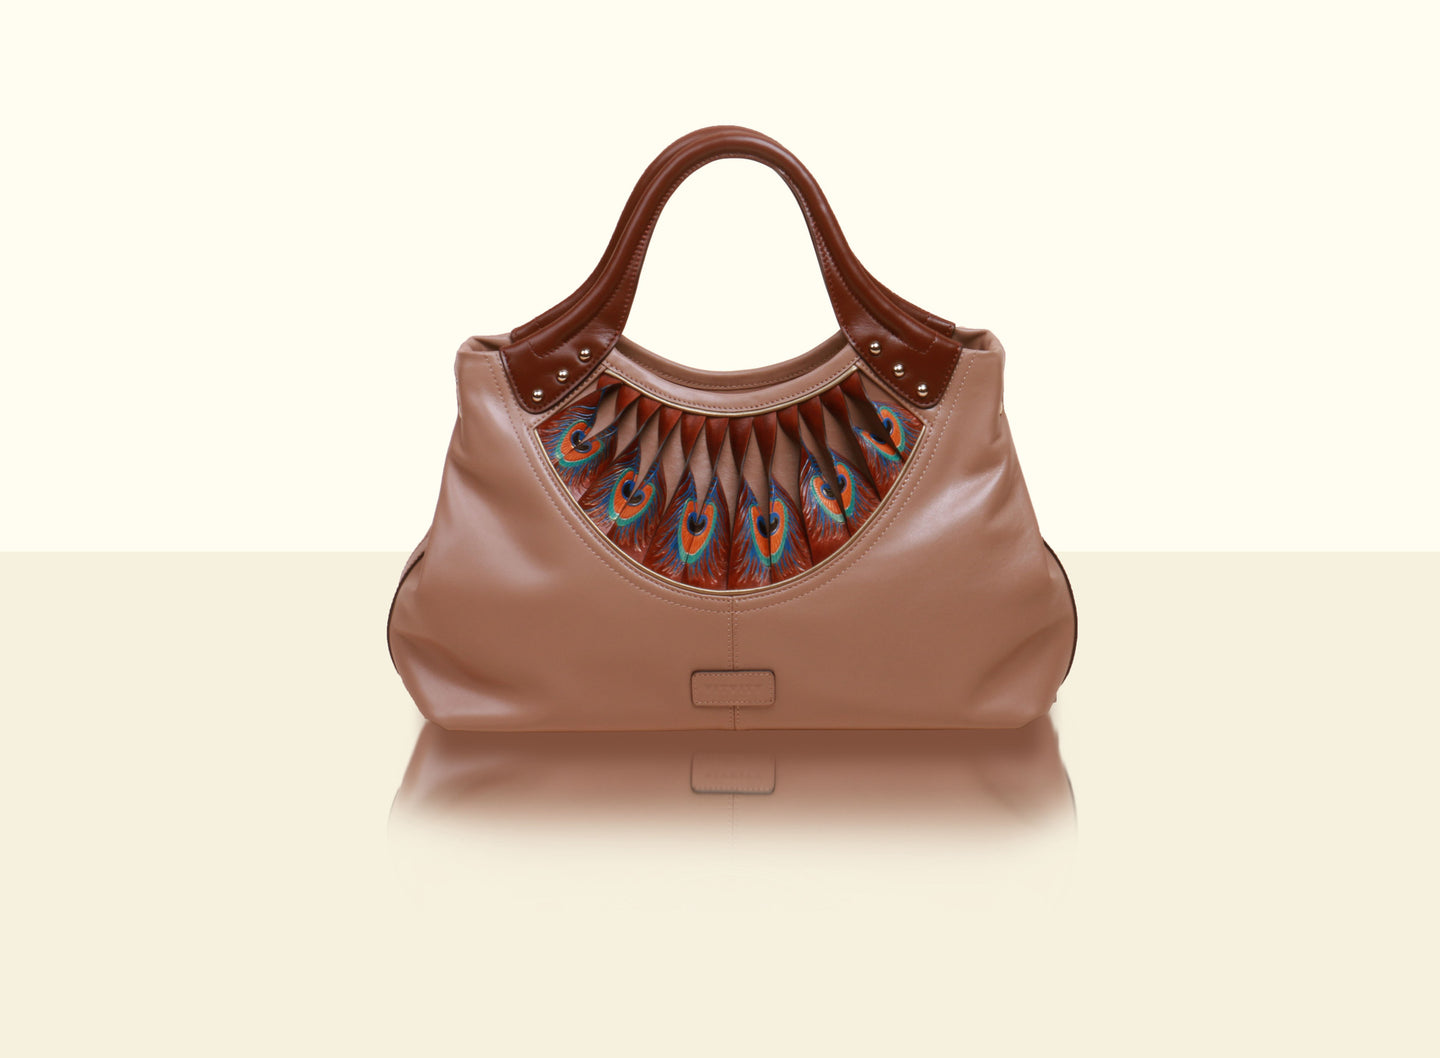 Exquisite Fan Top Handle - Deep Apricot and Brown